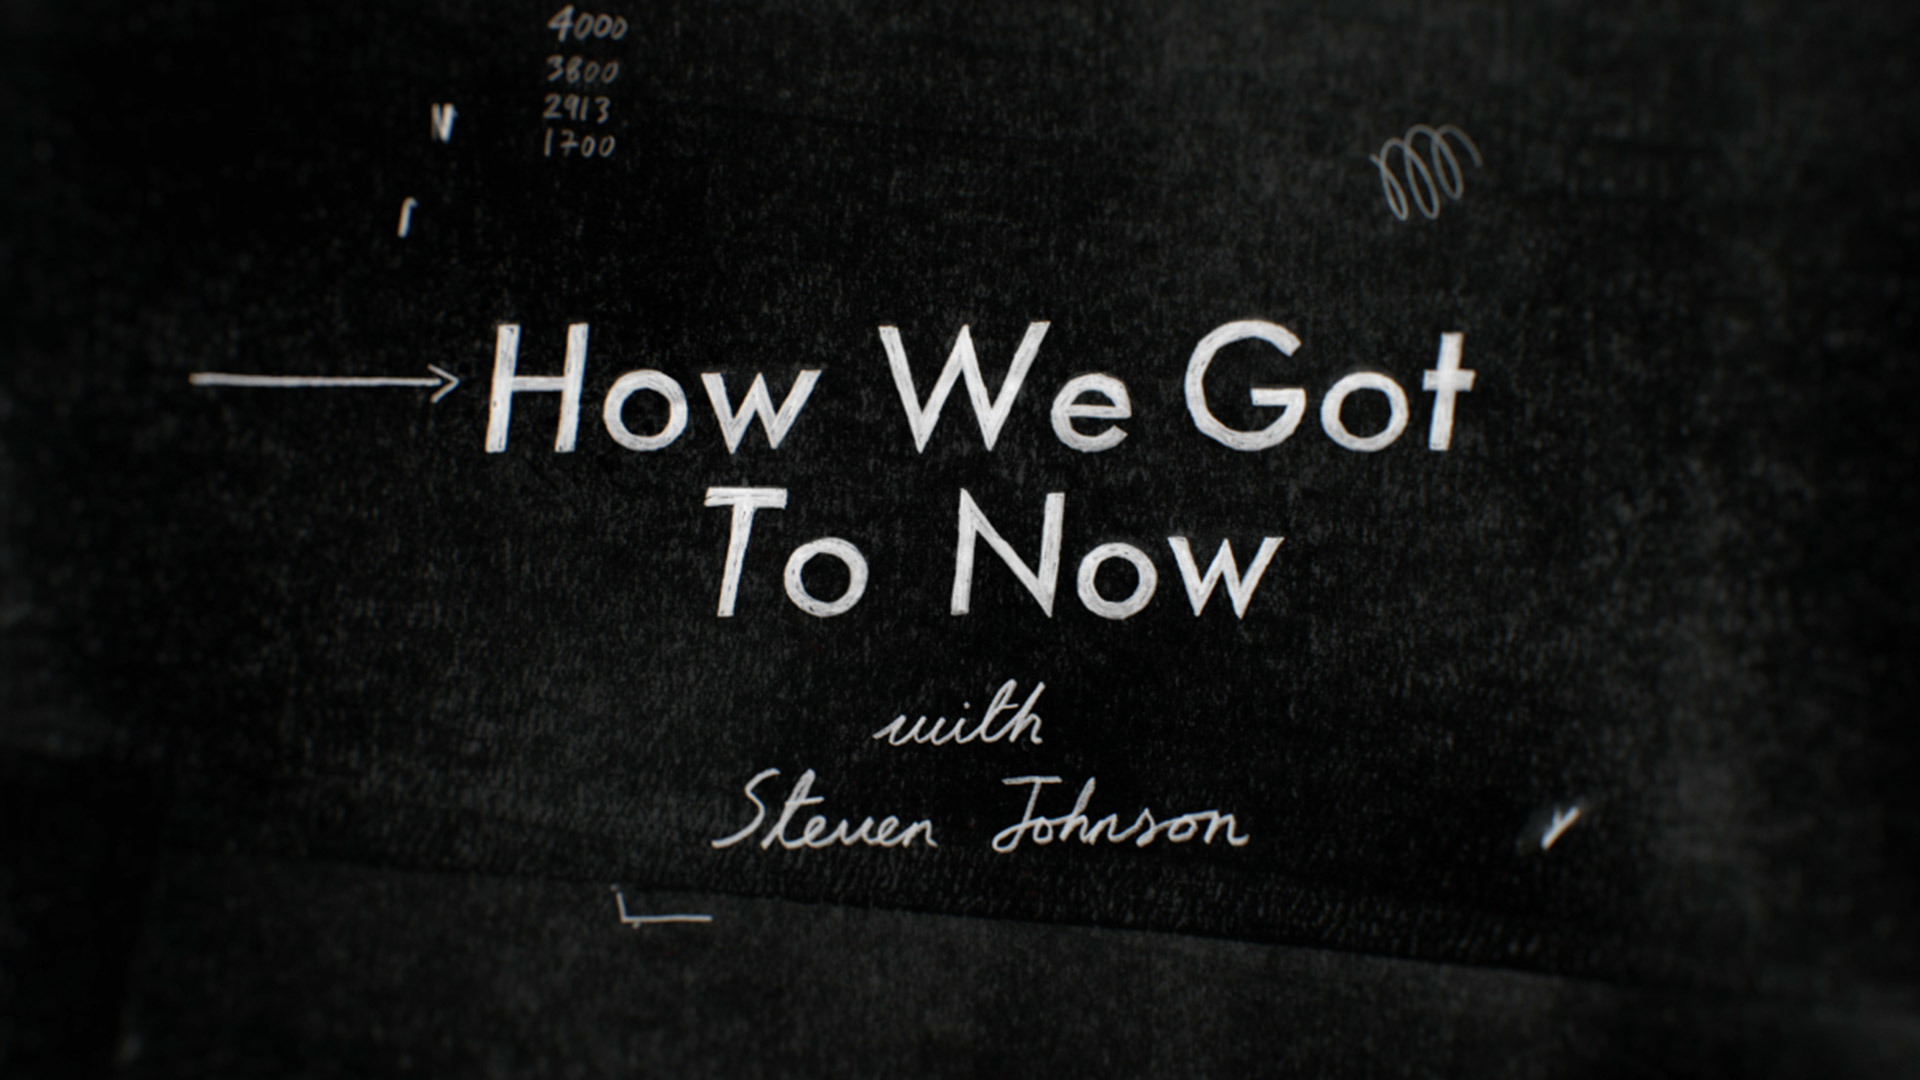 Show How We Got to Now with Steven Johnson